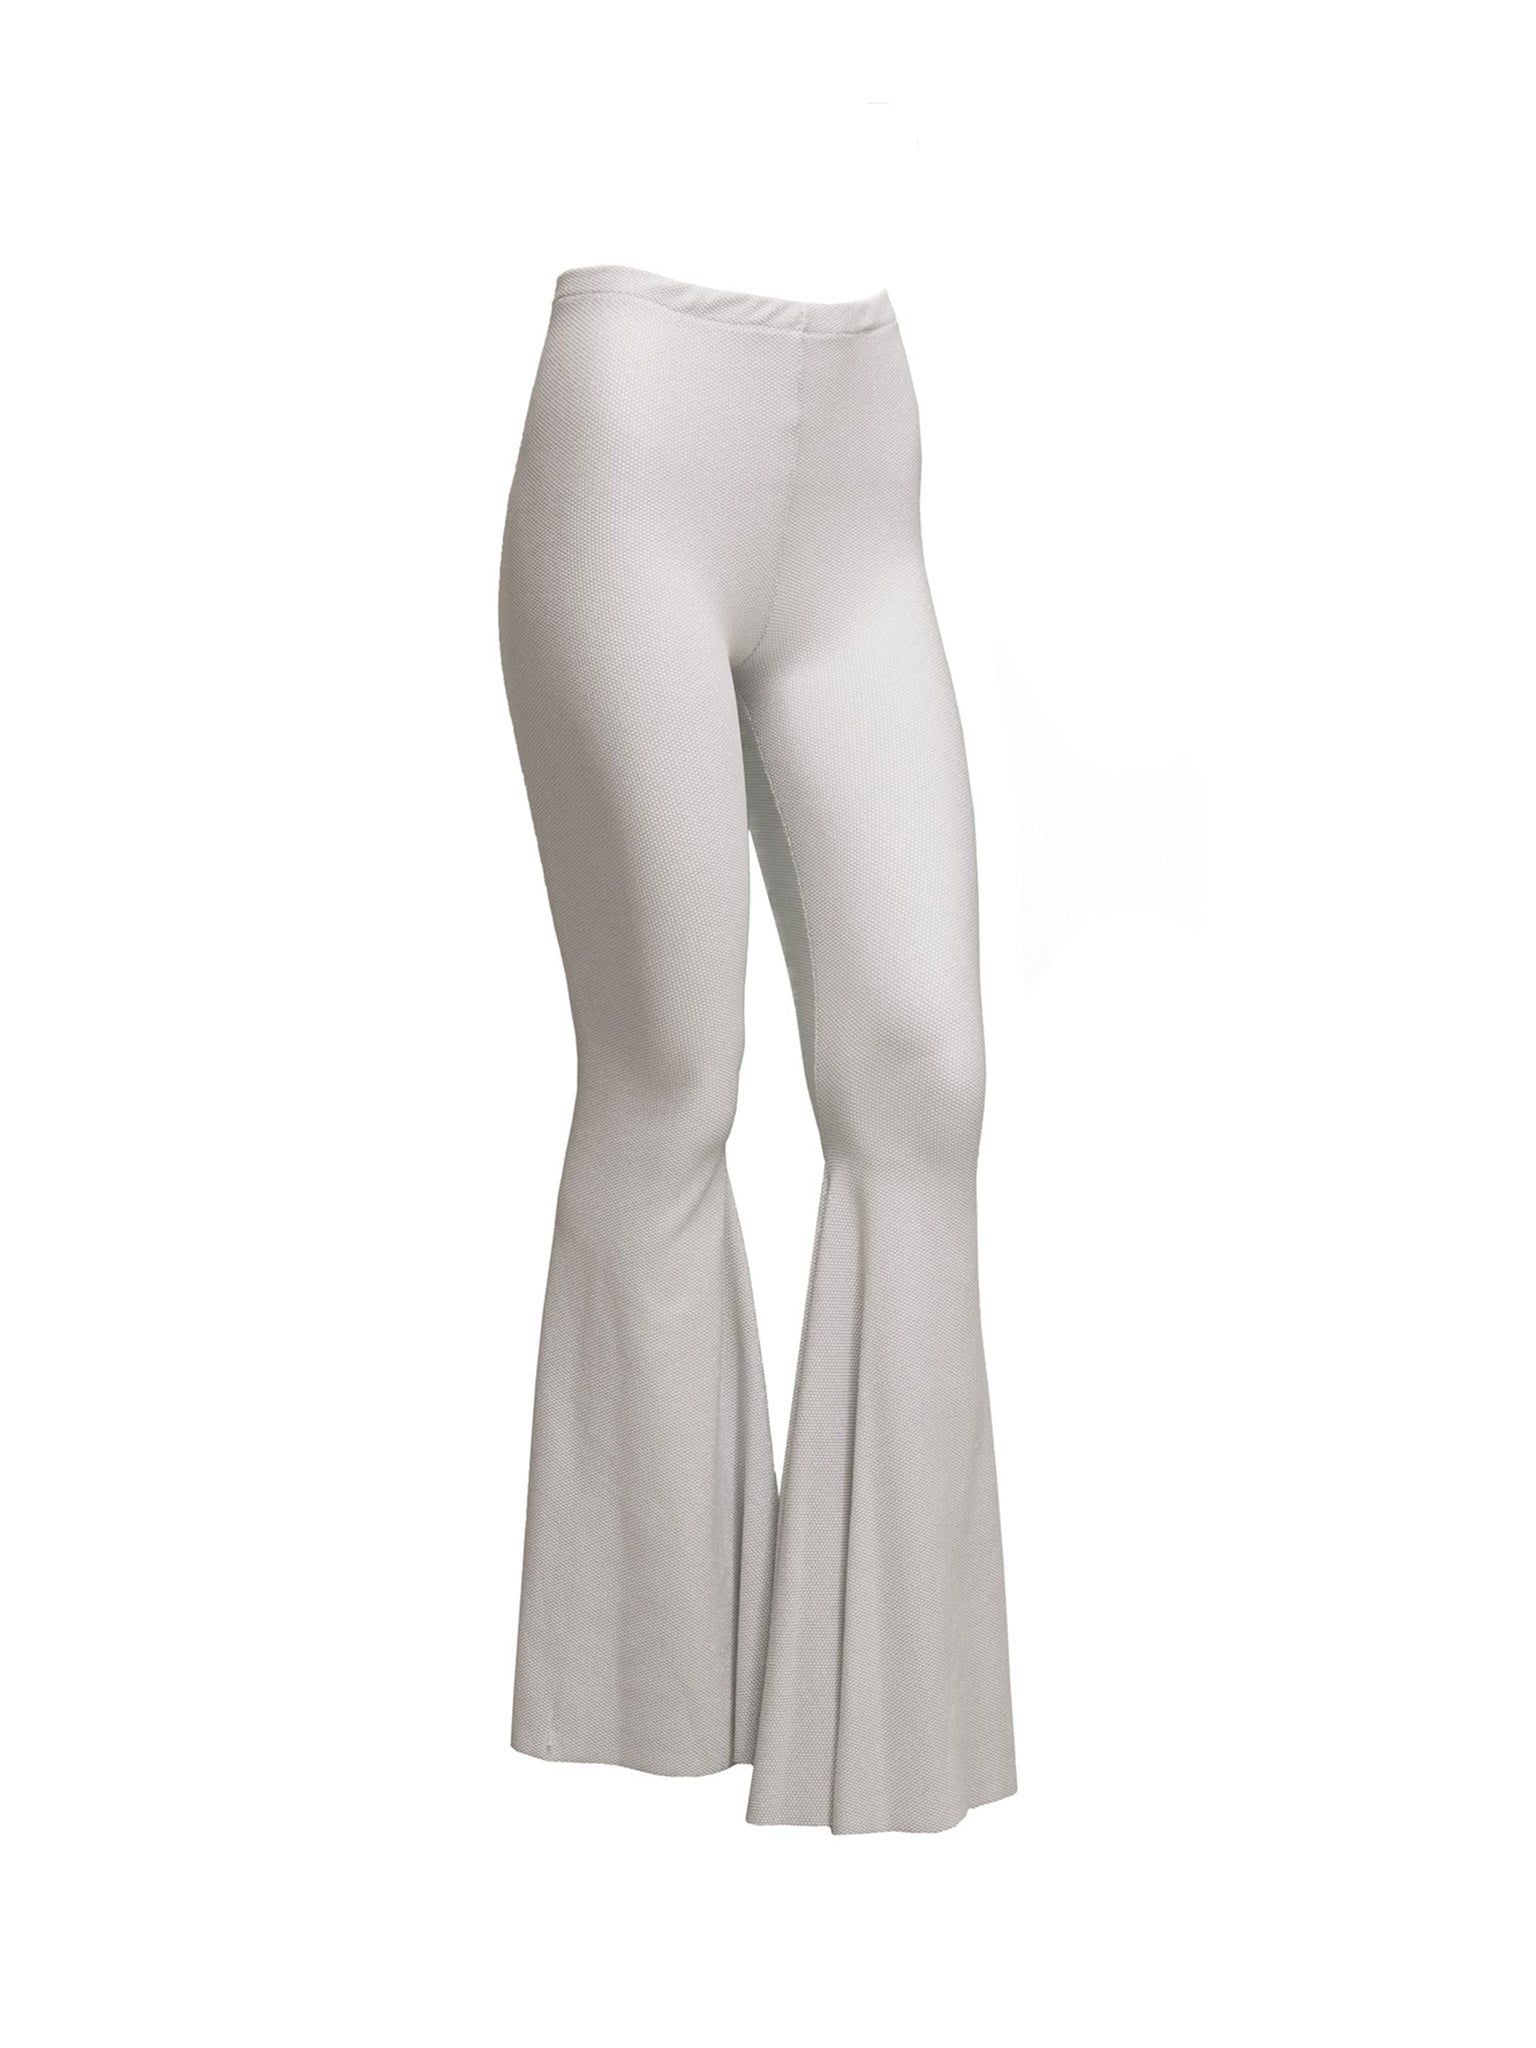 Jellylight pants in White Silver